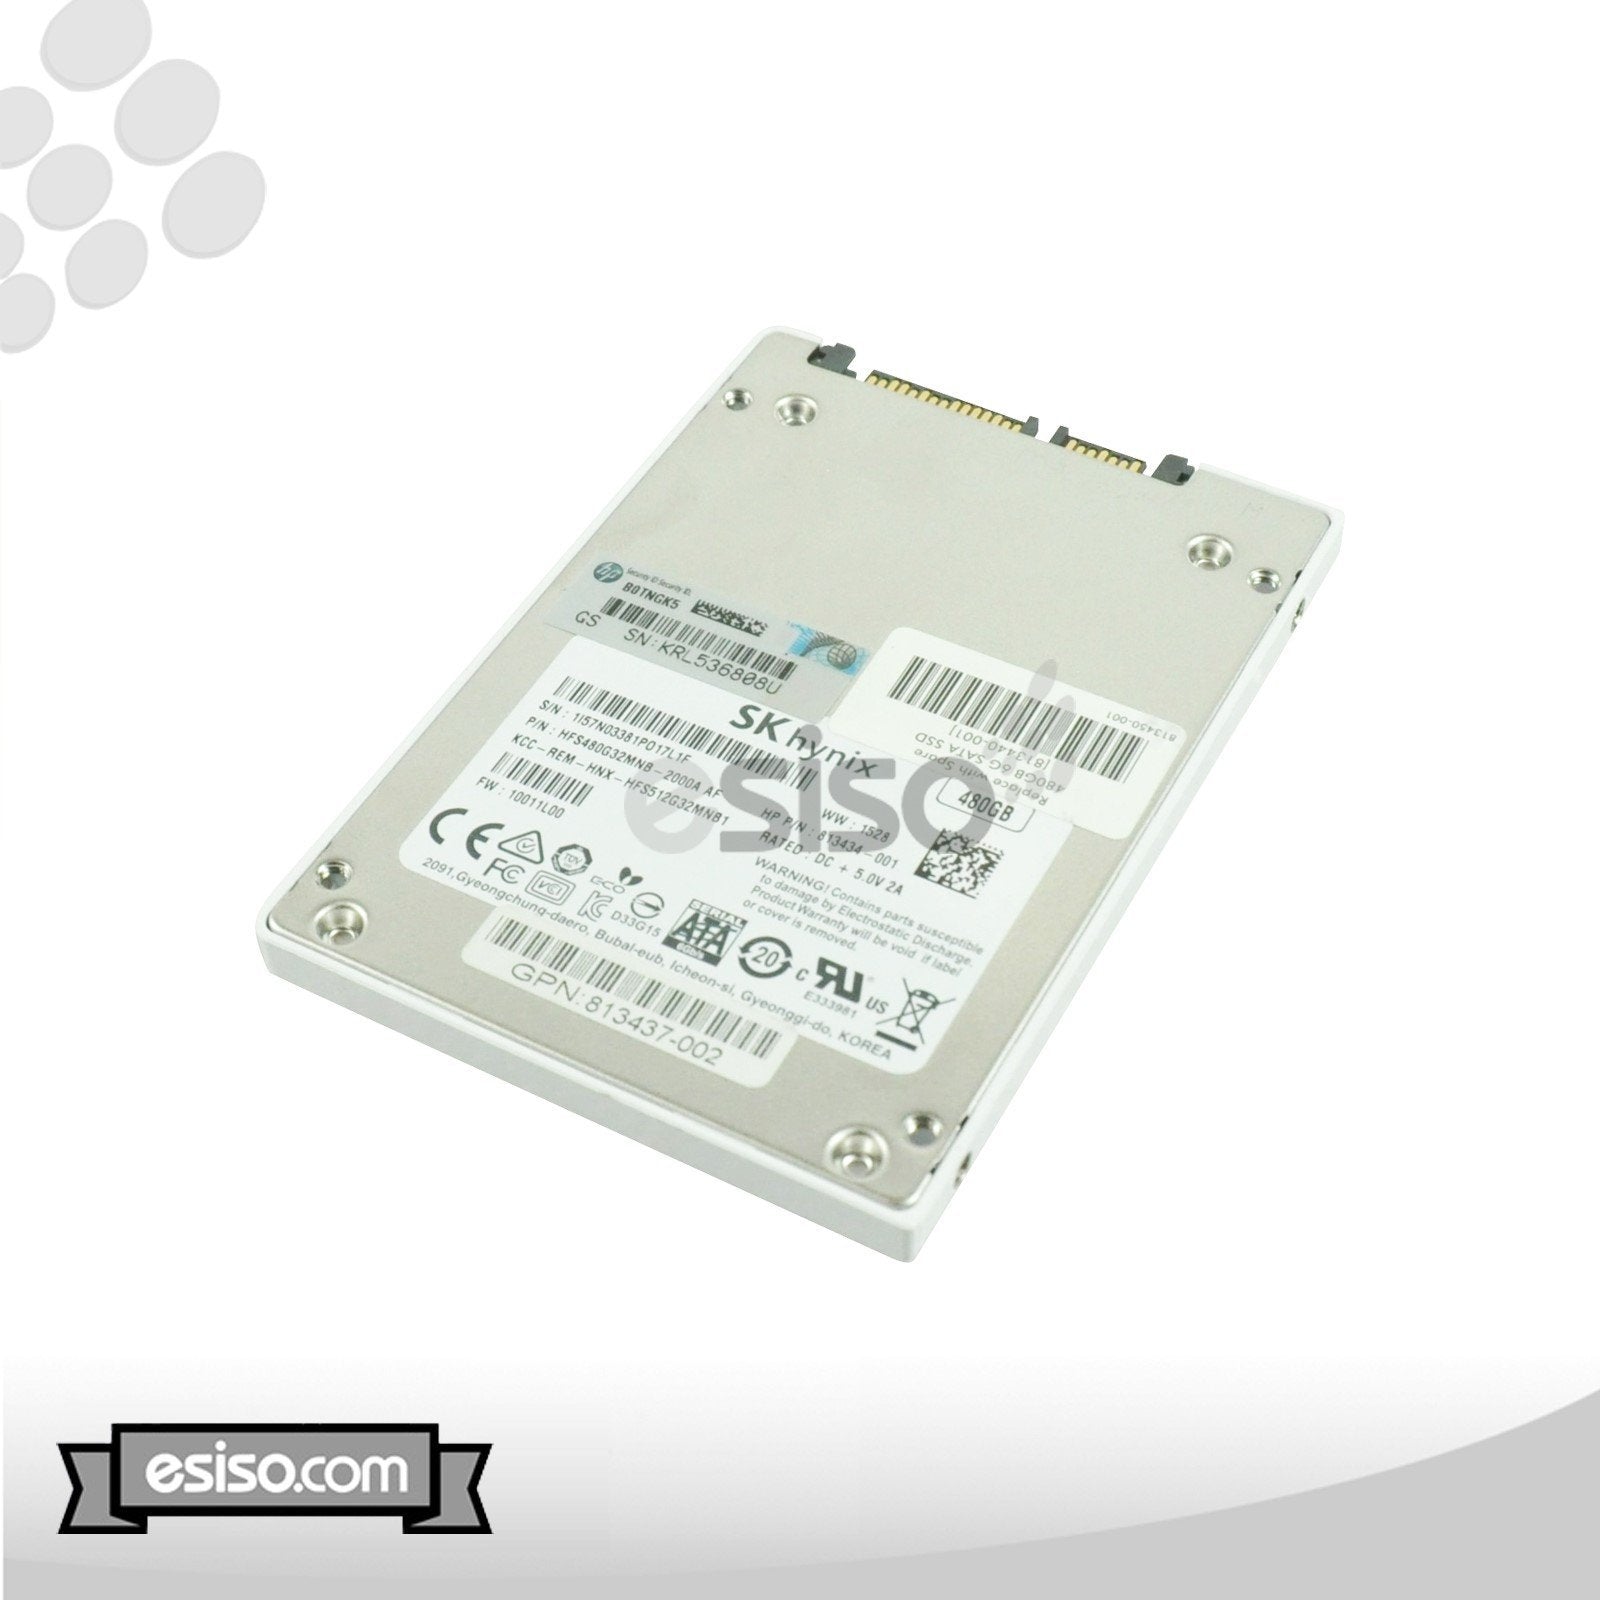 NEW 813435-B21 813440-001 HPE 480GB 6G SFF 2.5" SATA VE SSD - 0 HOURS